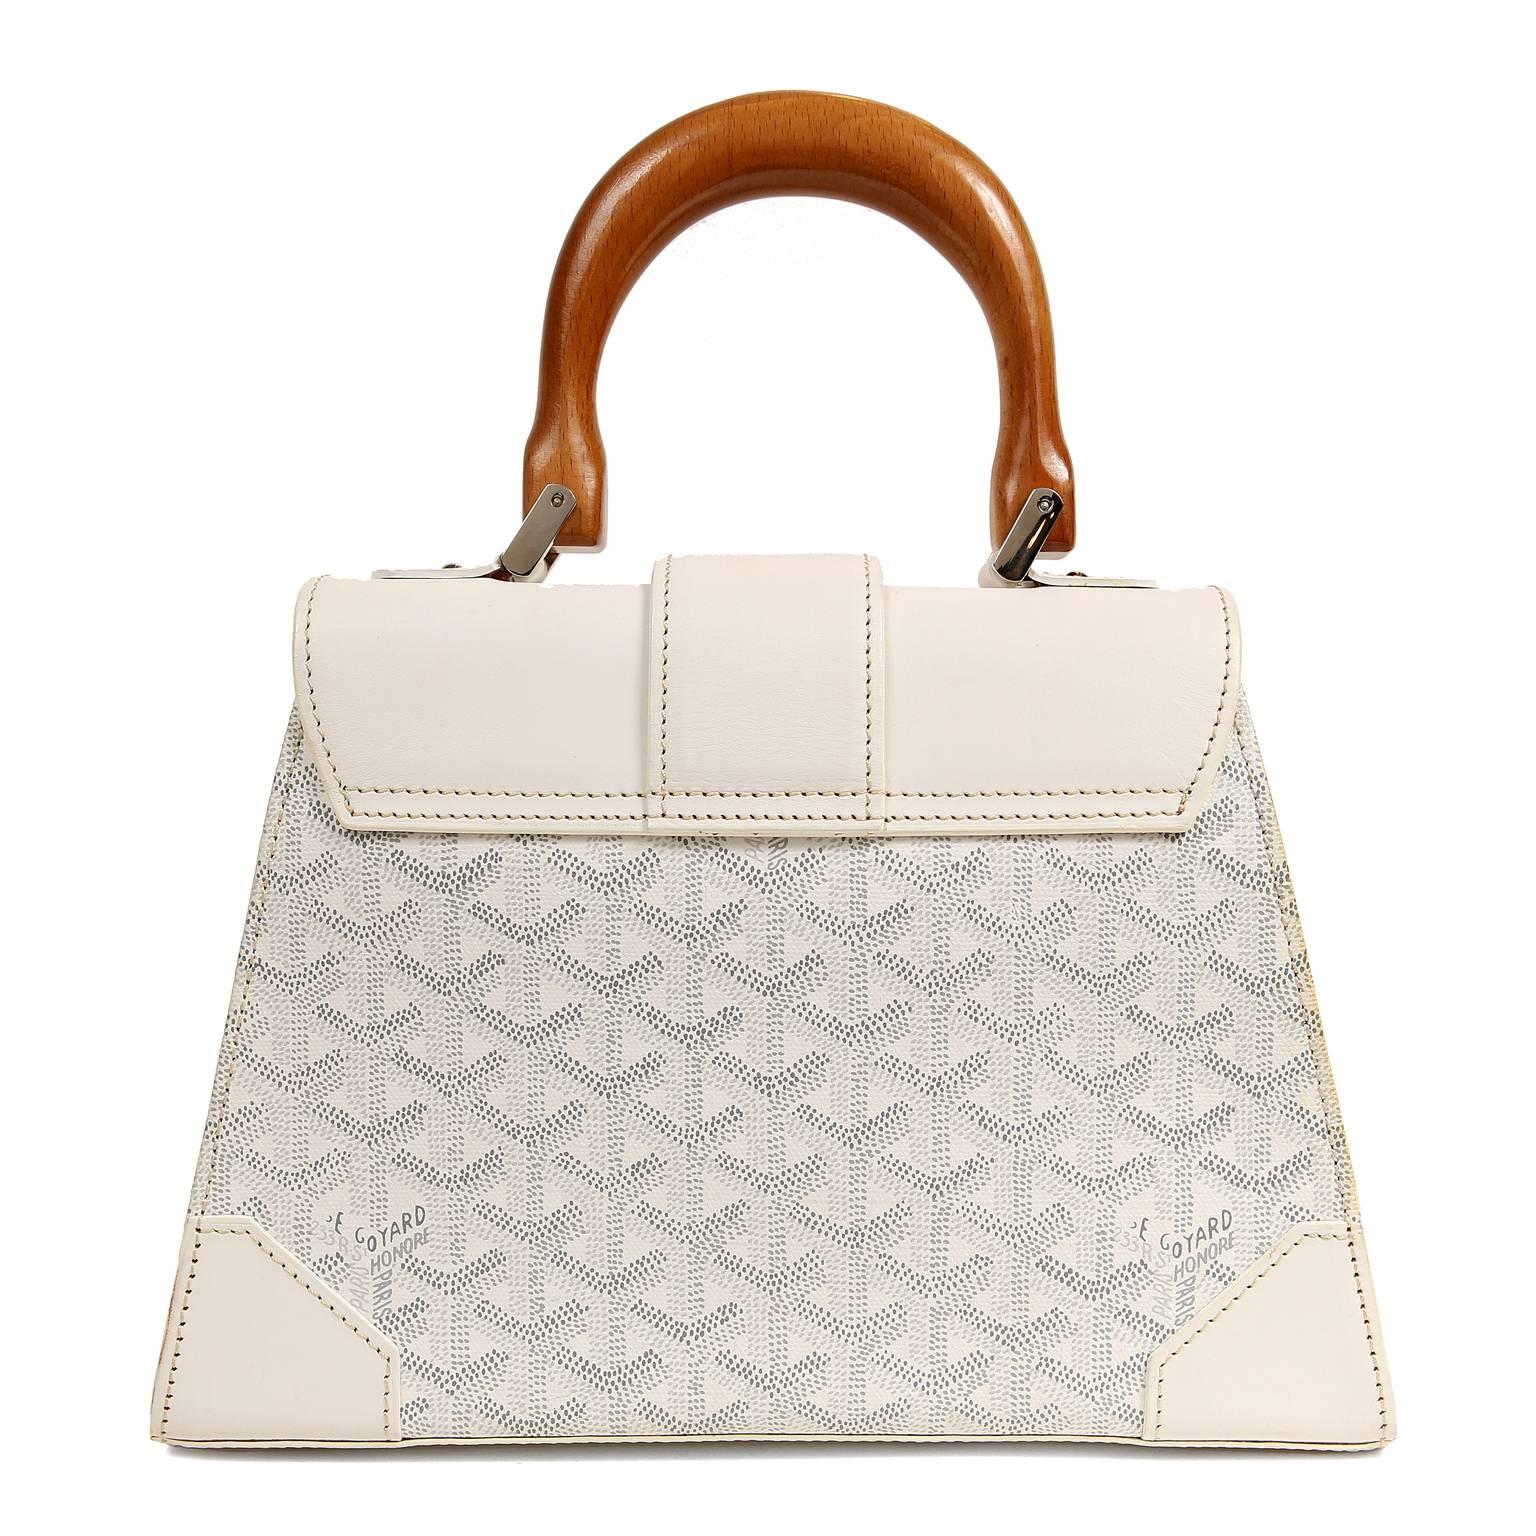 Goyard White Saigon Handle Bag- Pristine, perhaps carried once
Structured top handle bag in signature Goyard chevron monogram canvas.  Sturdy reinforced white leather sides, flap and bottom.  Exquisite wooden accents and top handle.  Silver tone